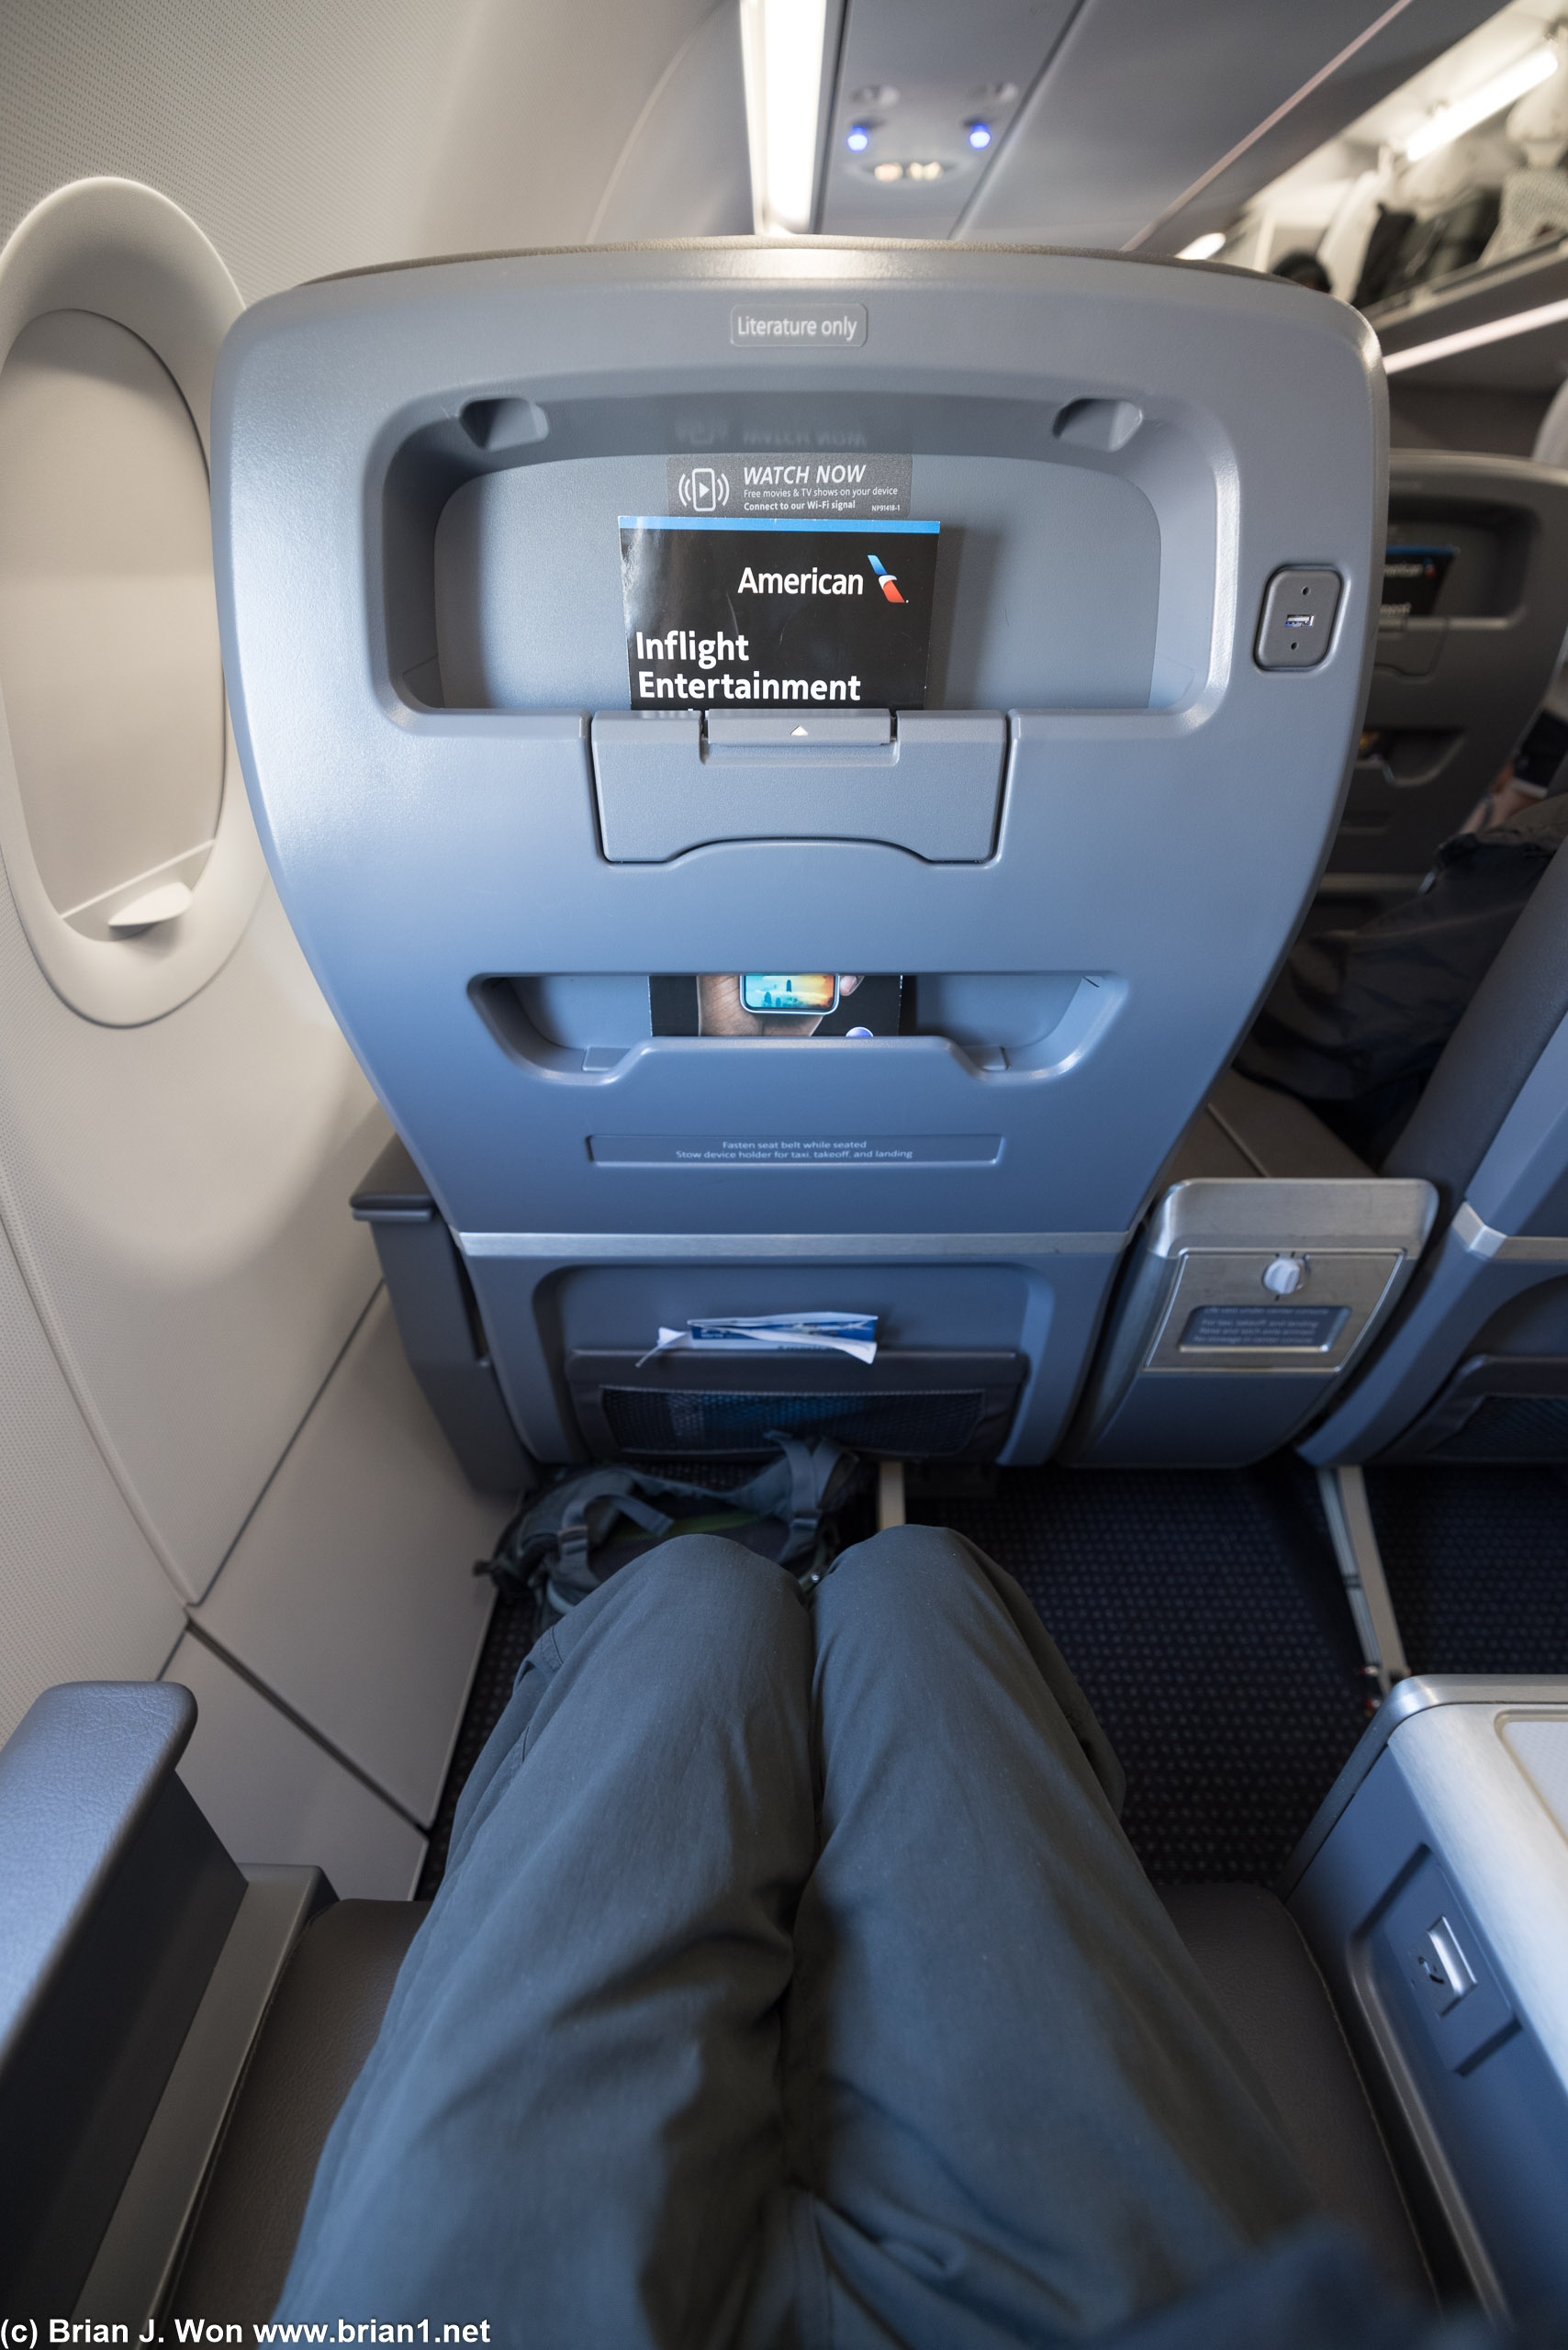 Brand new domestic first class. No screens, welcome to American Airlines.